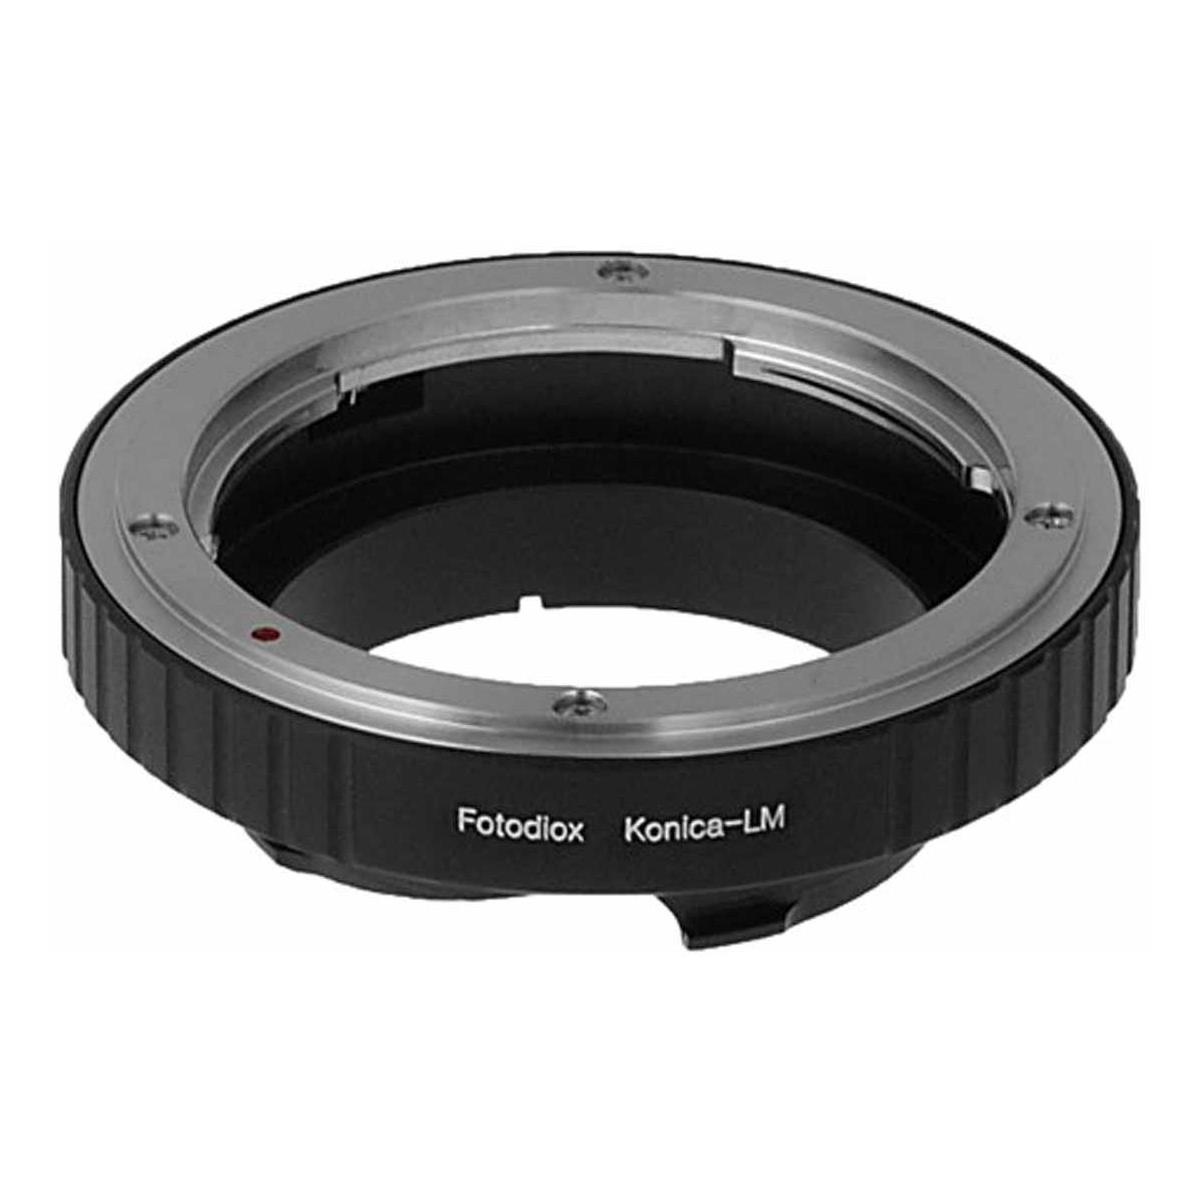 Image of Fotodiox Mount Adapter for Konica AR Lens to Leica M-Series Camera